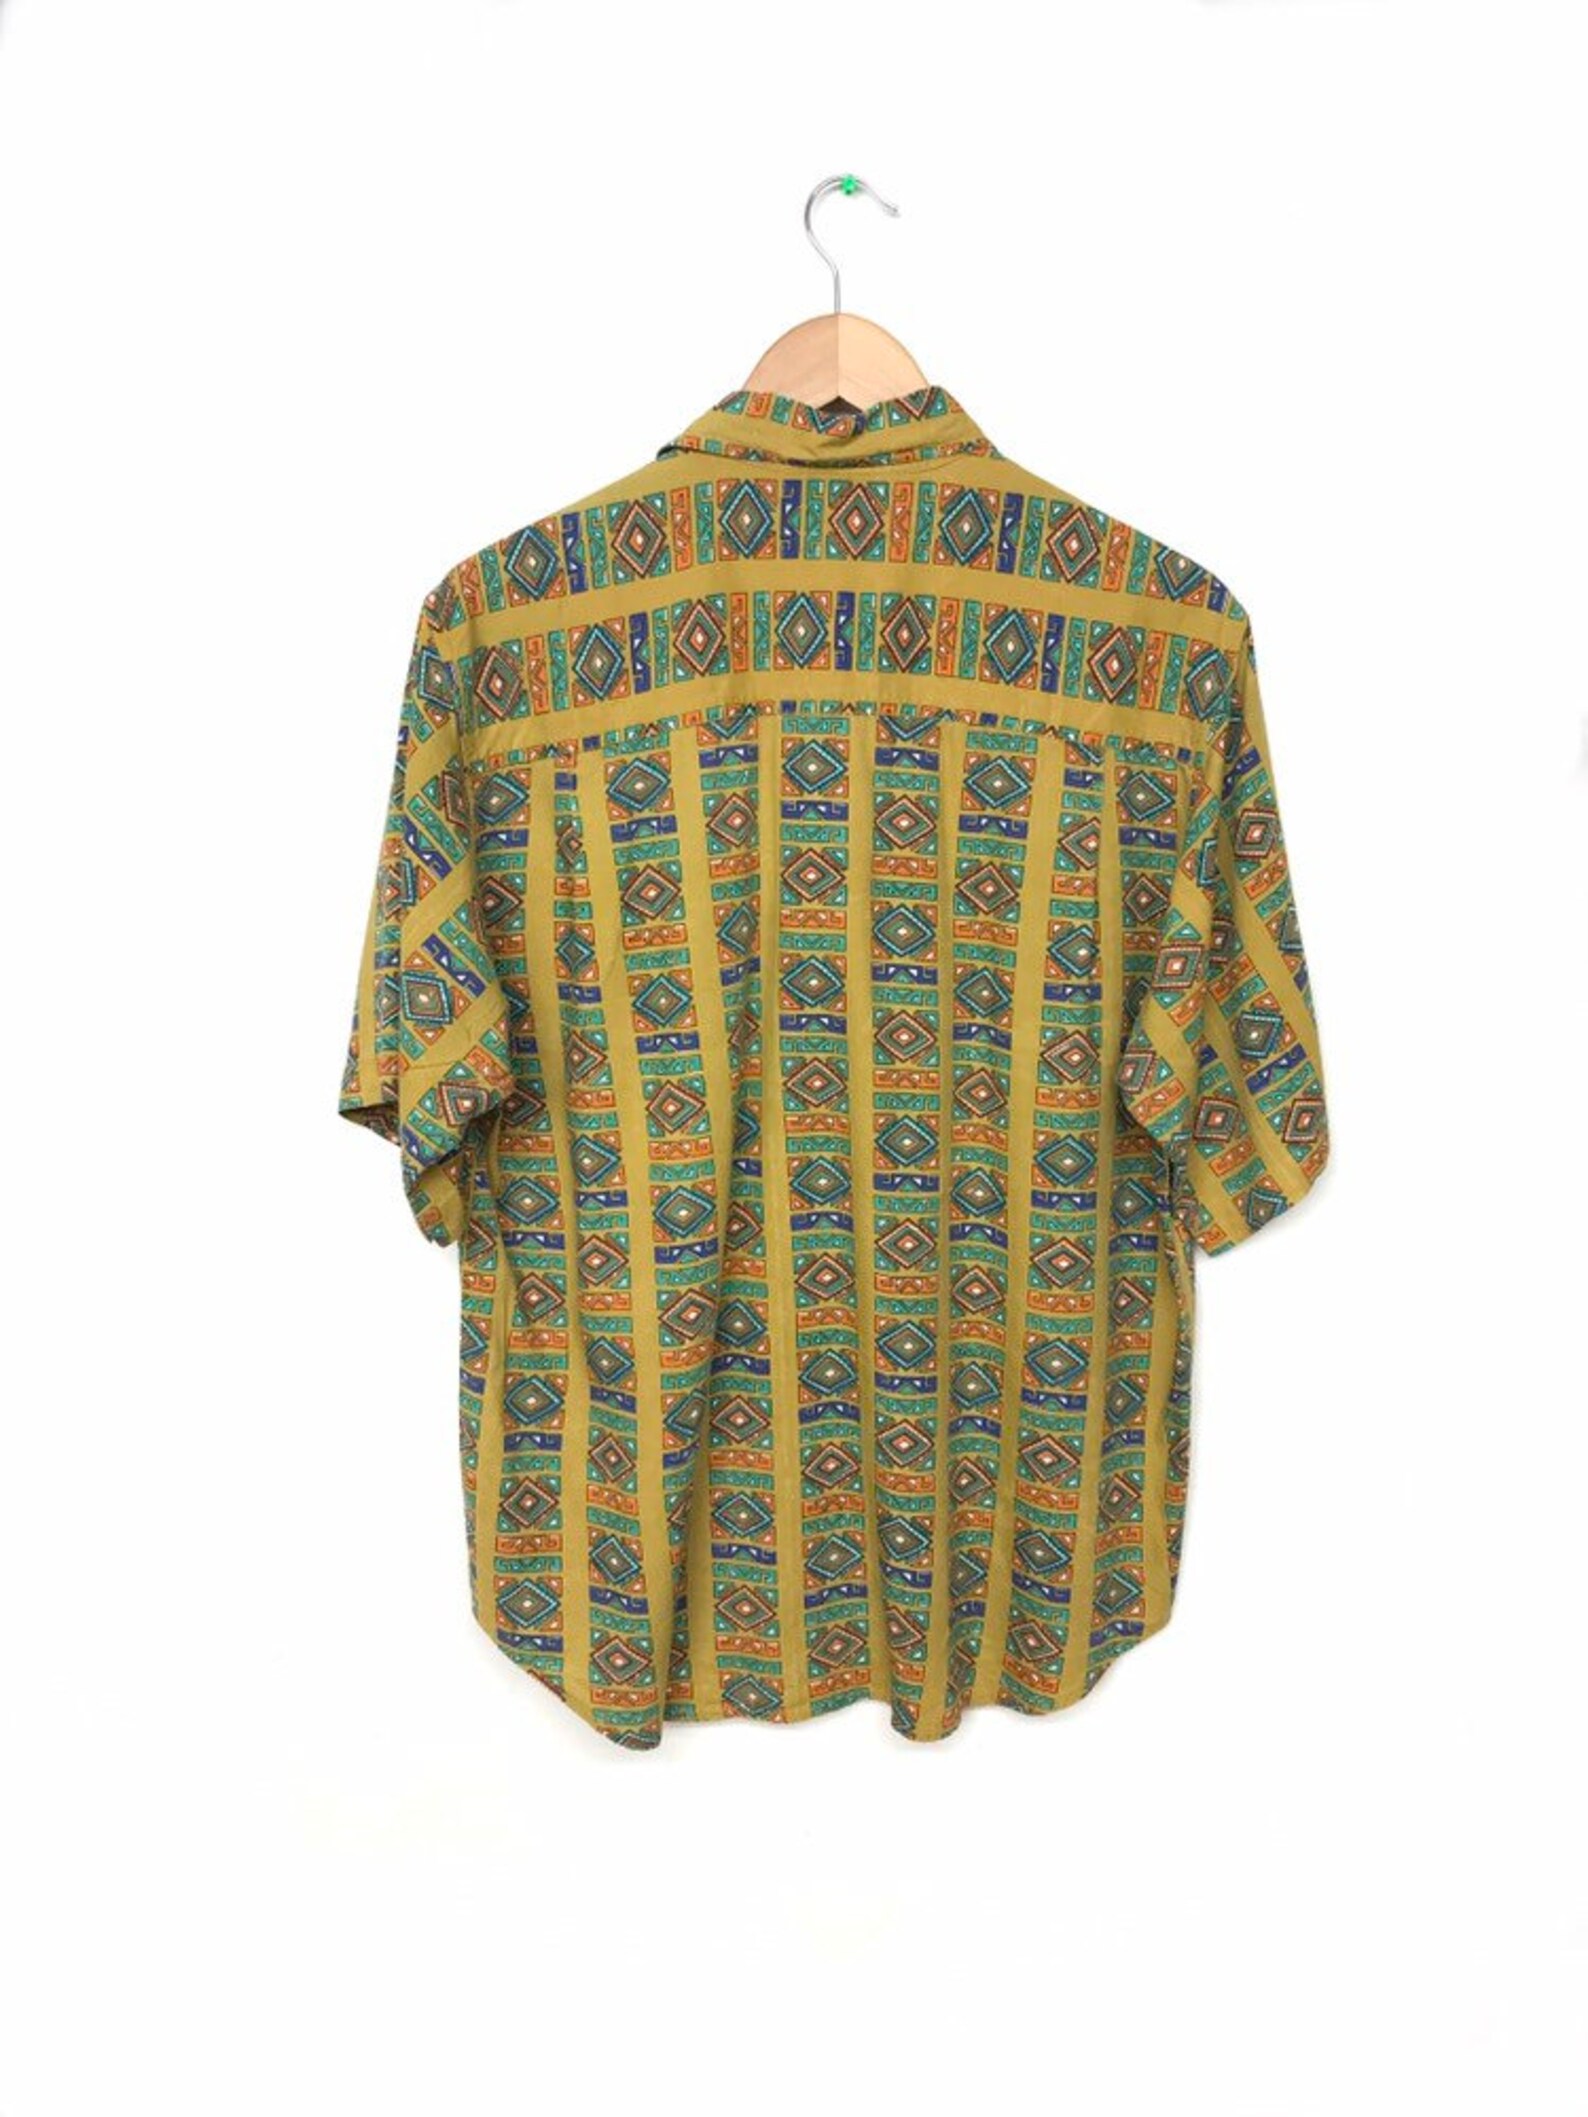 Vintage 90s Abstract Aztec Shirt Brown Blue Orange Green | Etsy